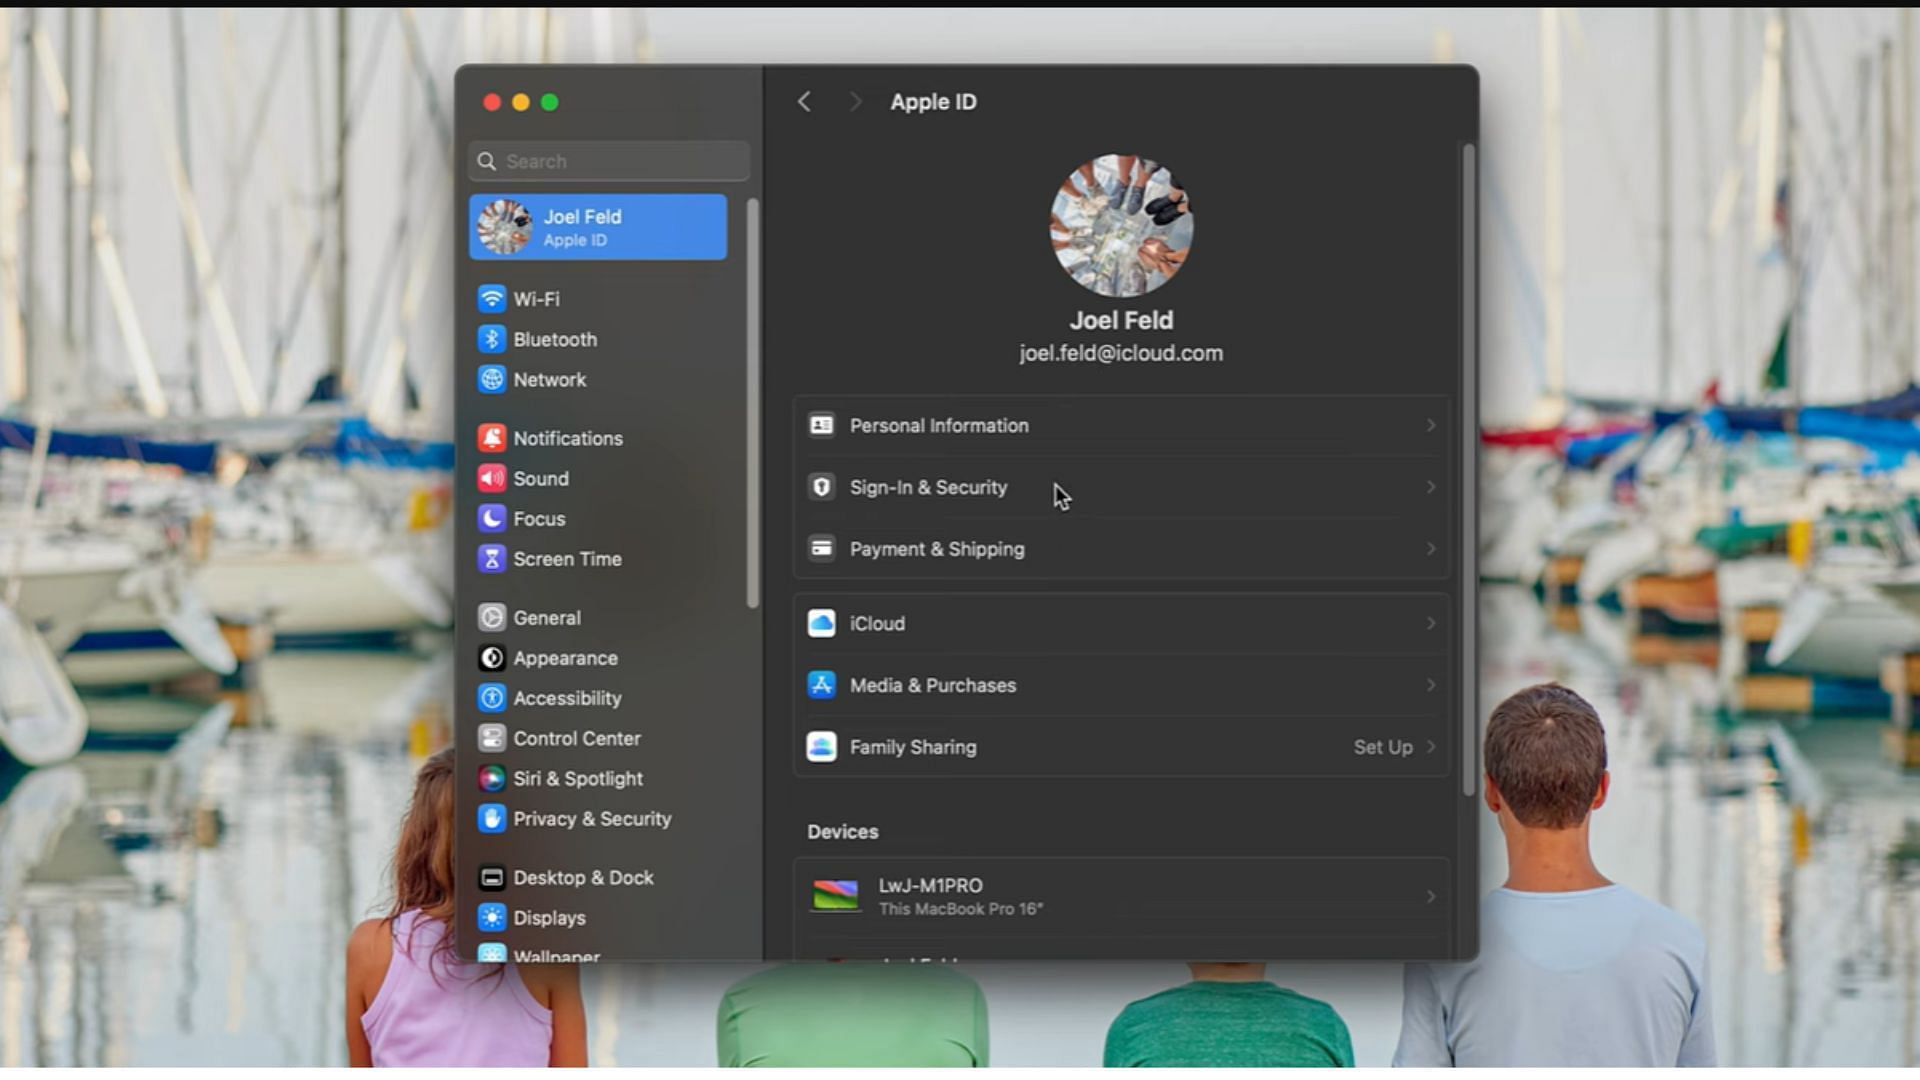 System settings window with all options (Image via Apple||YouTube/Learn with Joel Feld)